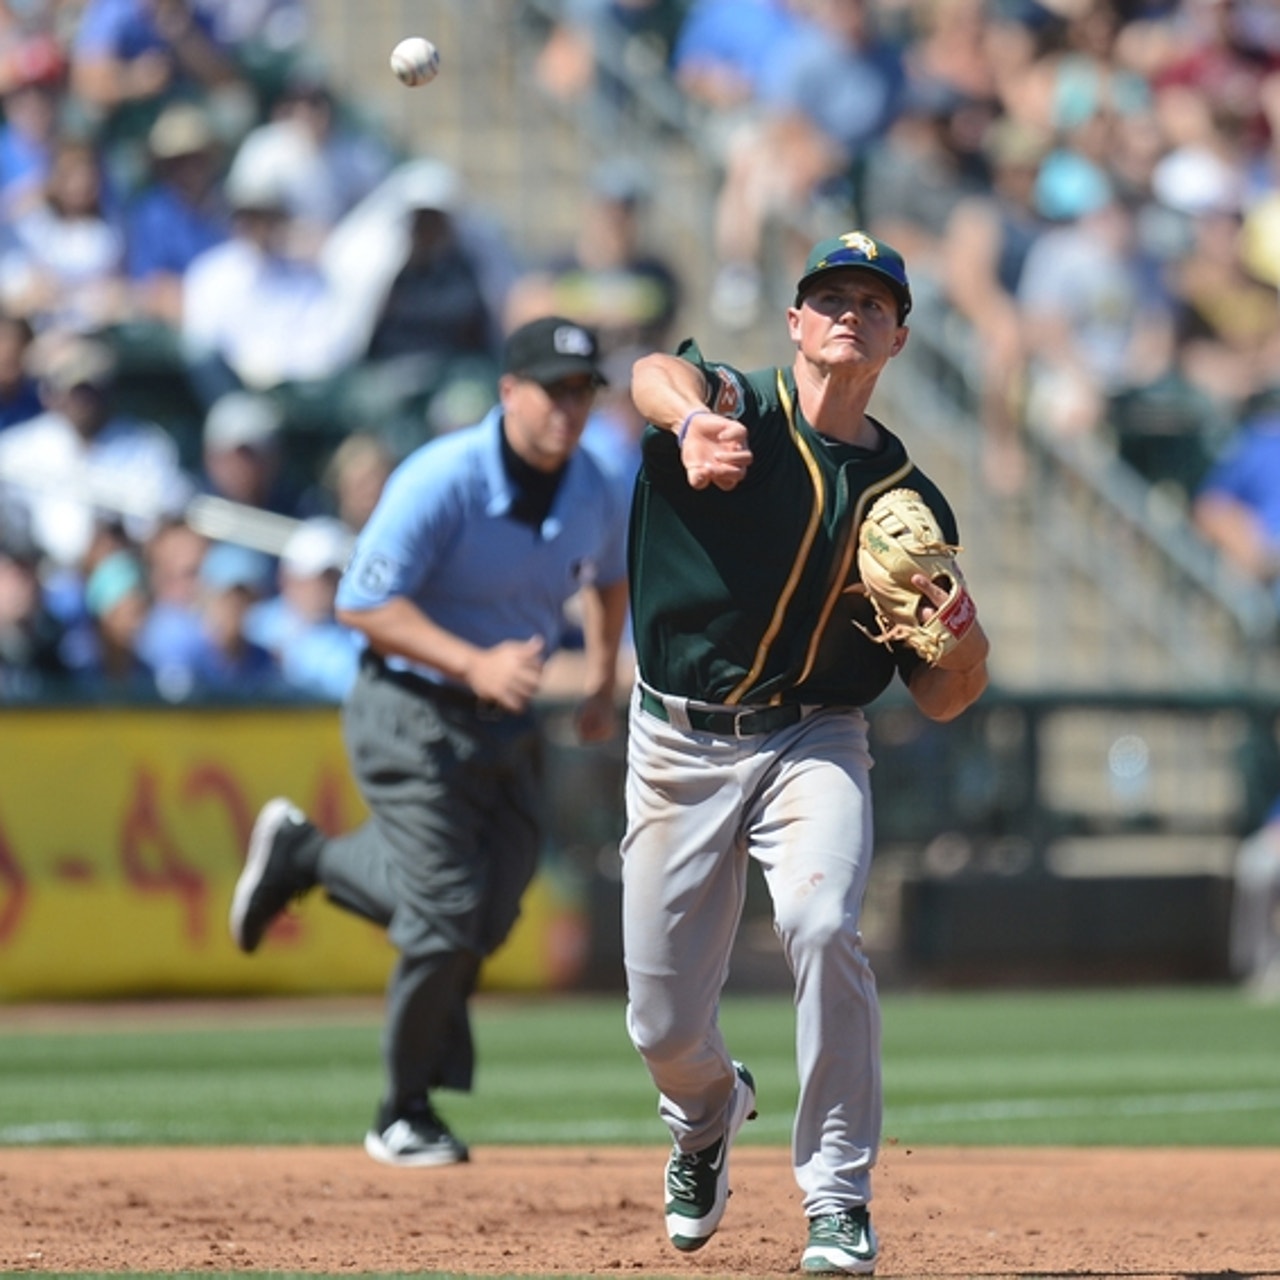 A's prospect Matt Chapman may have strongest arm in minors